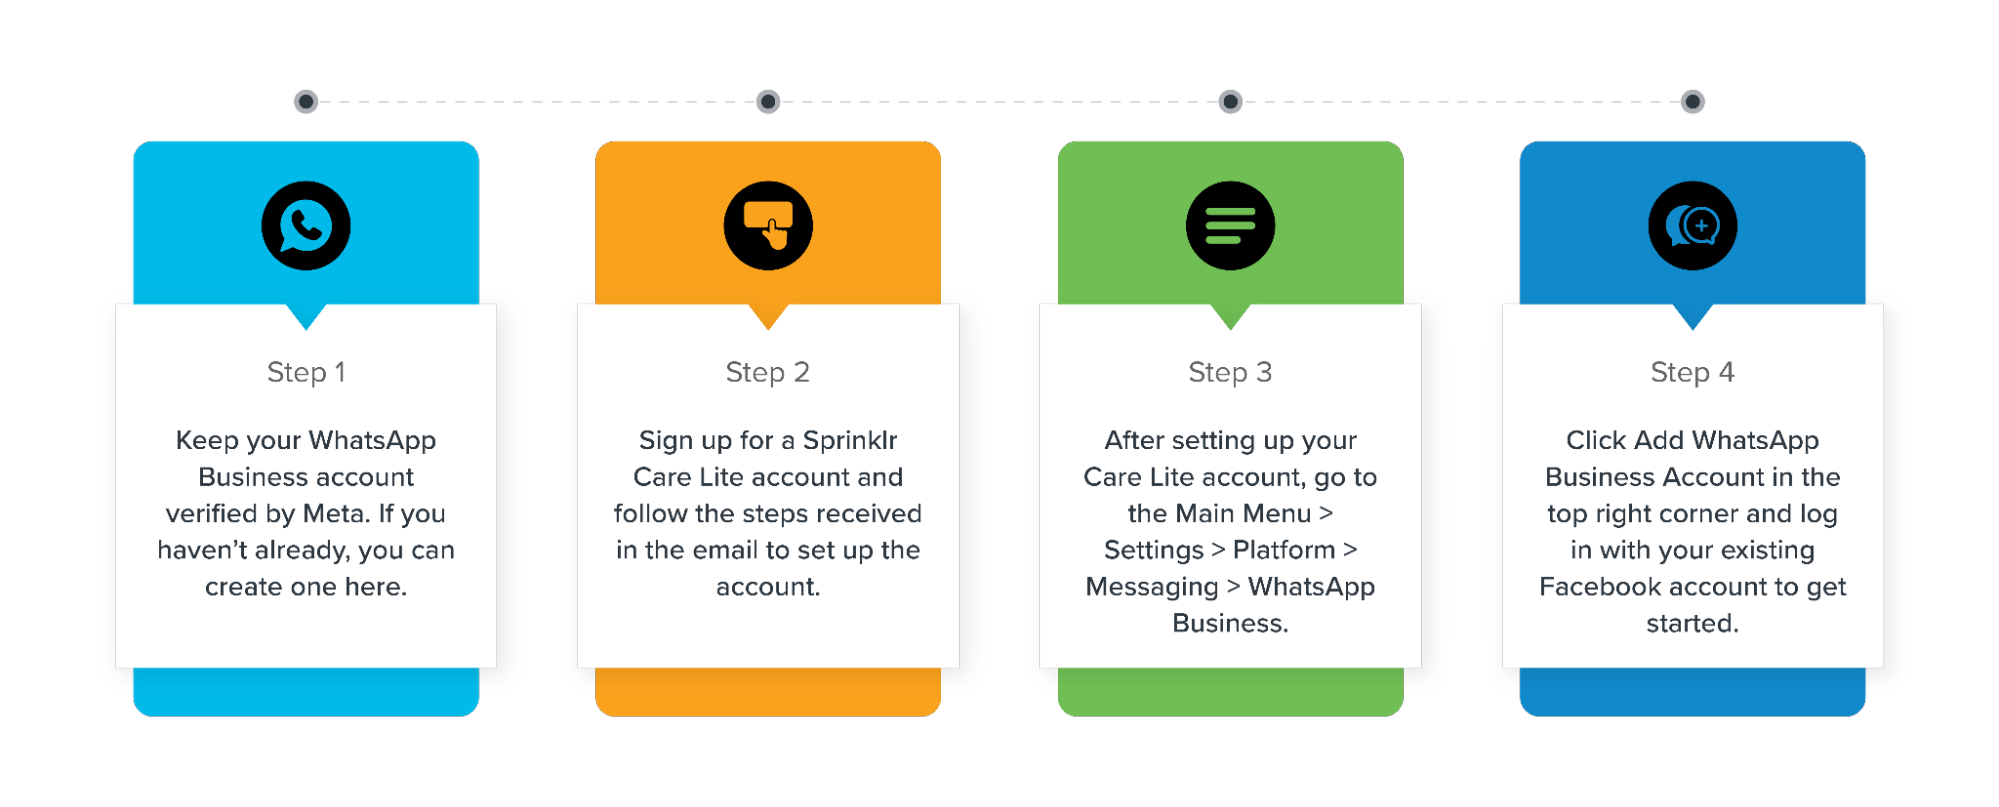 An image showing the 4 simple steps to integrate your Whatsapp Business account with Modern Care Lite